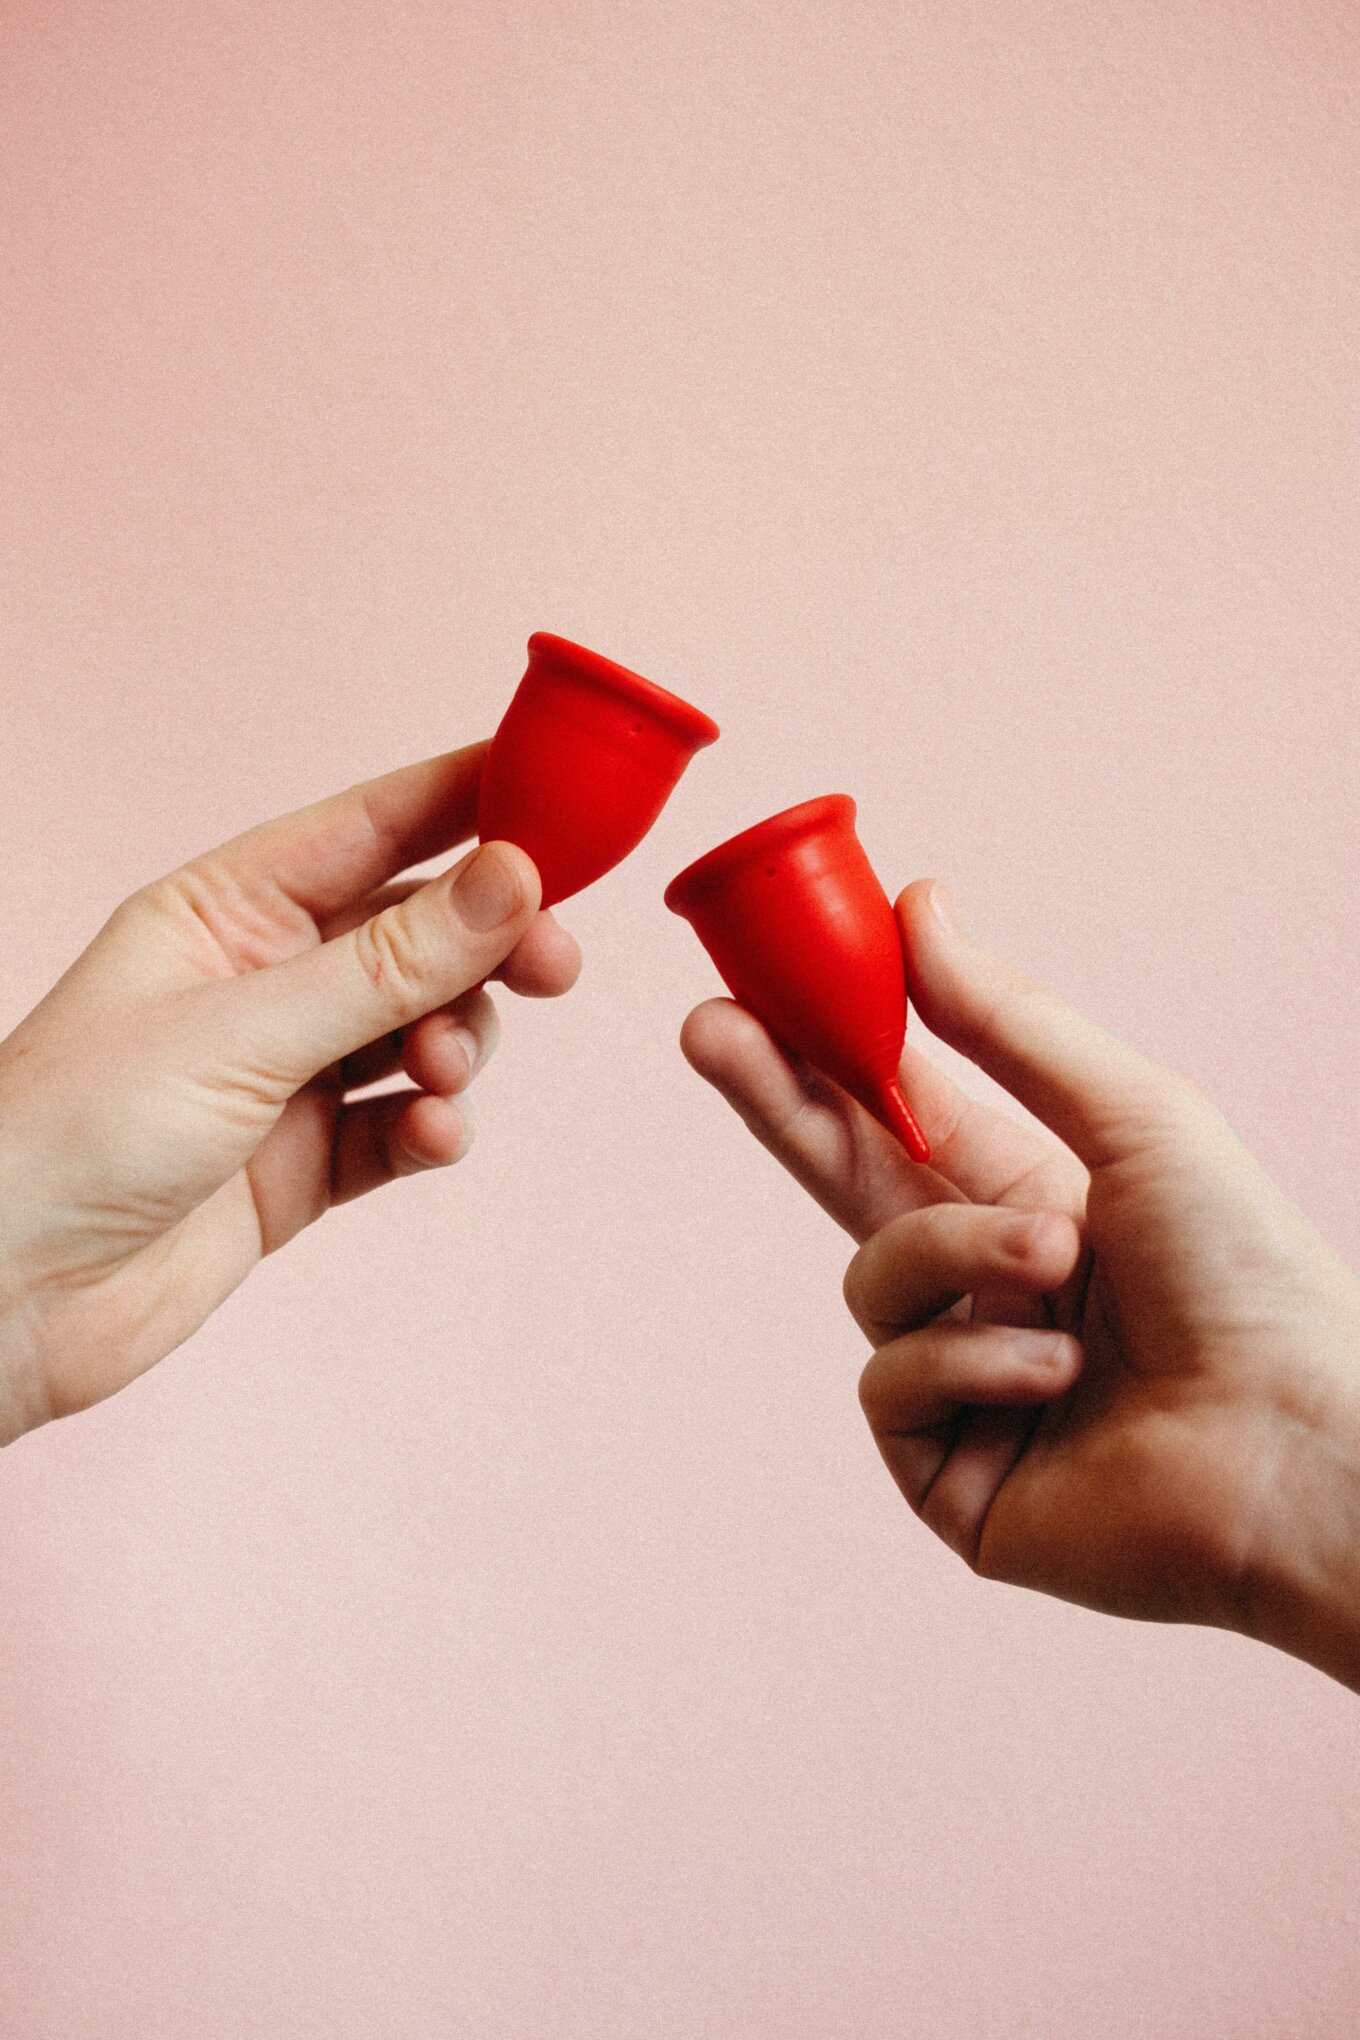 Two menstrual cups clinking together in a 'cheers' gesture